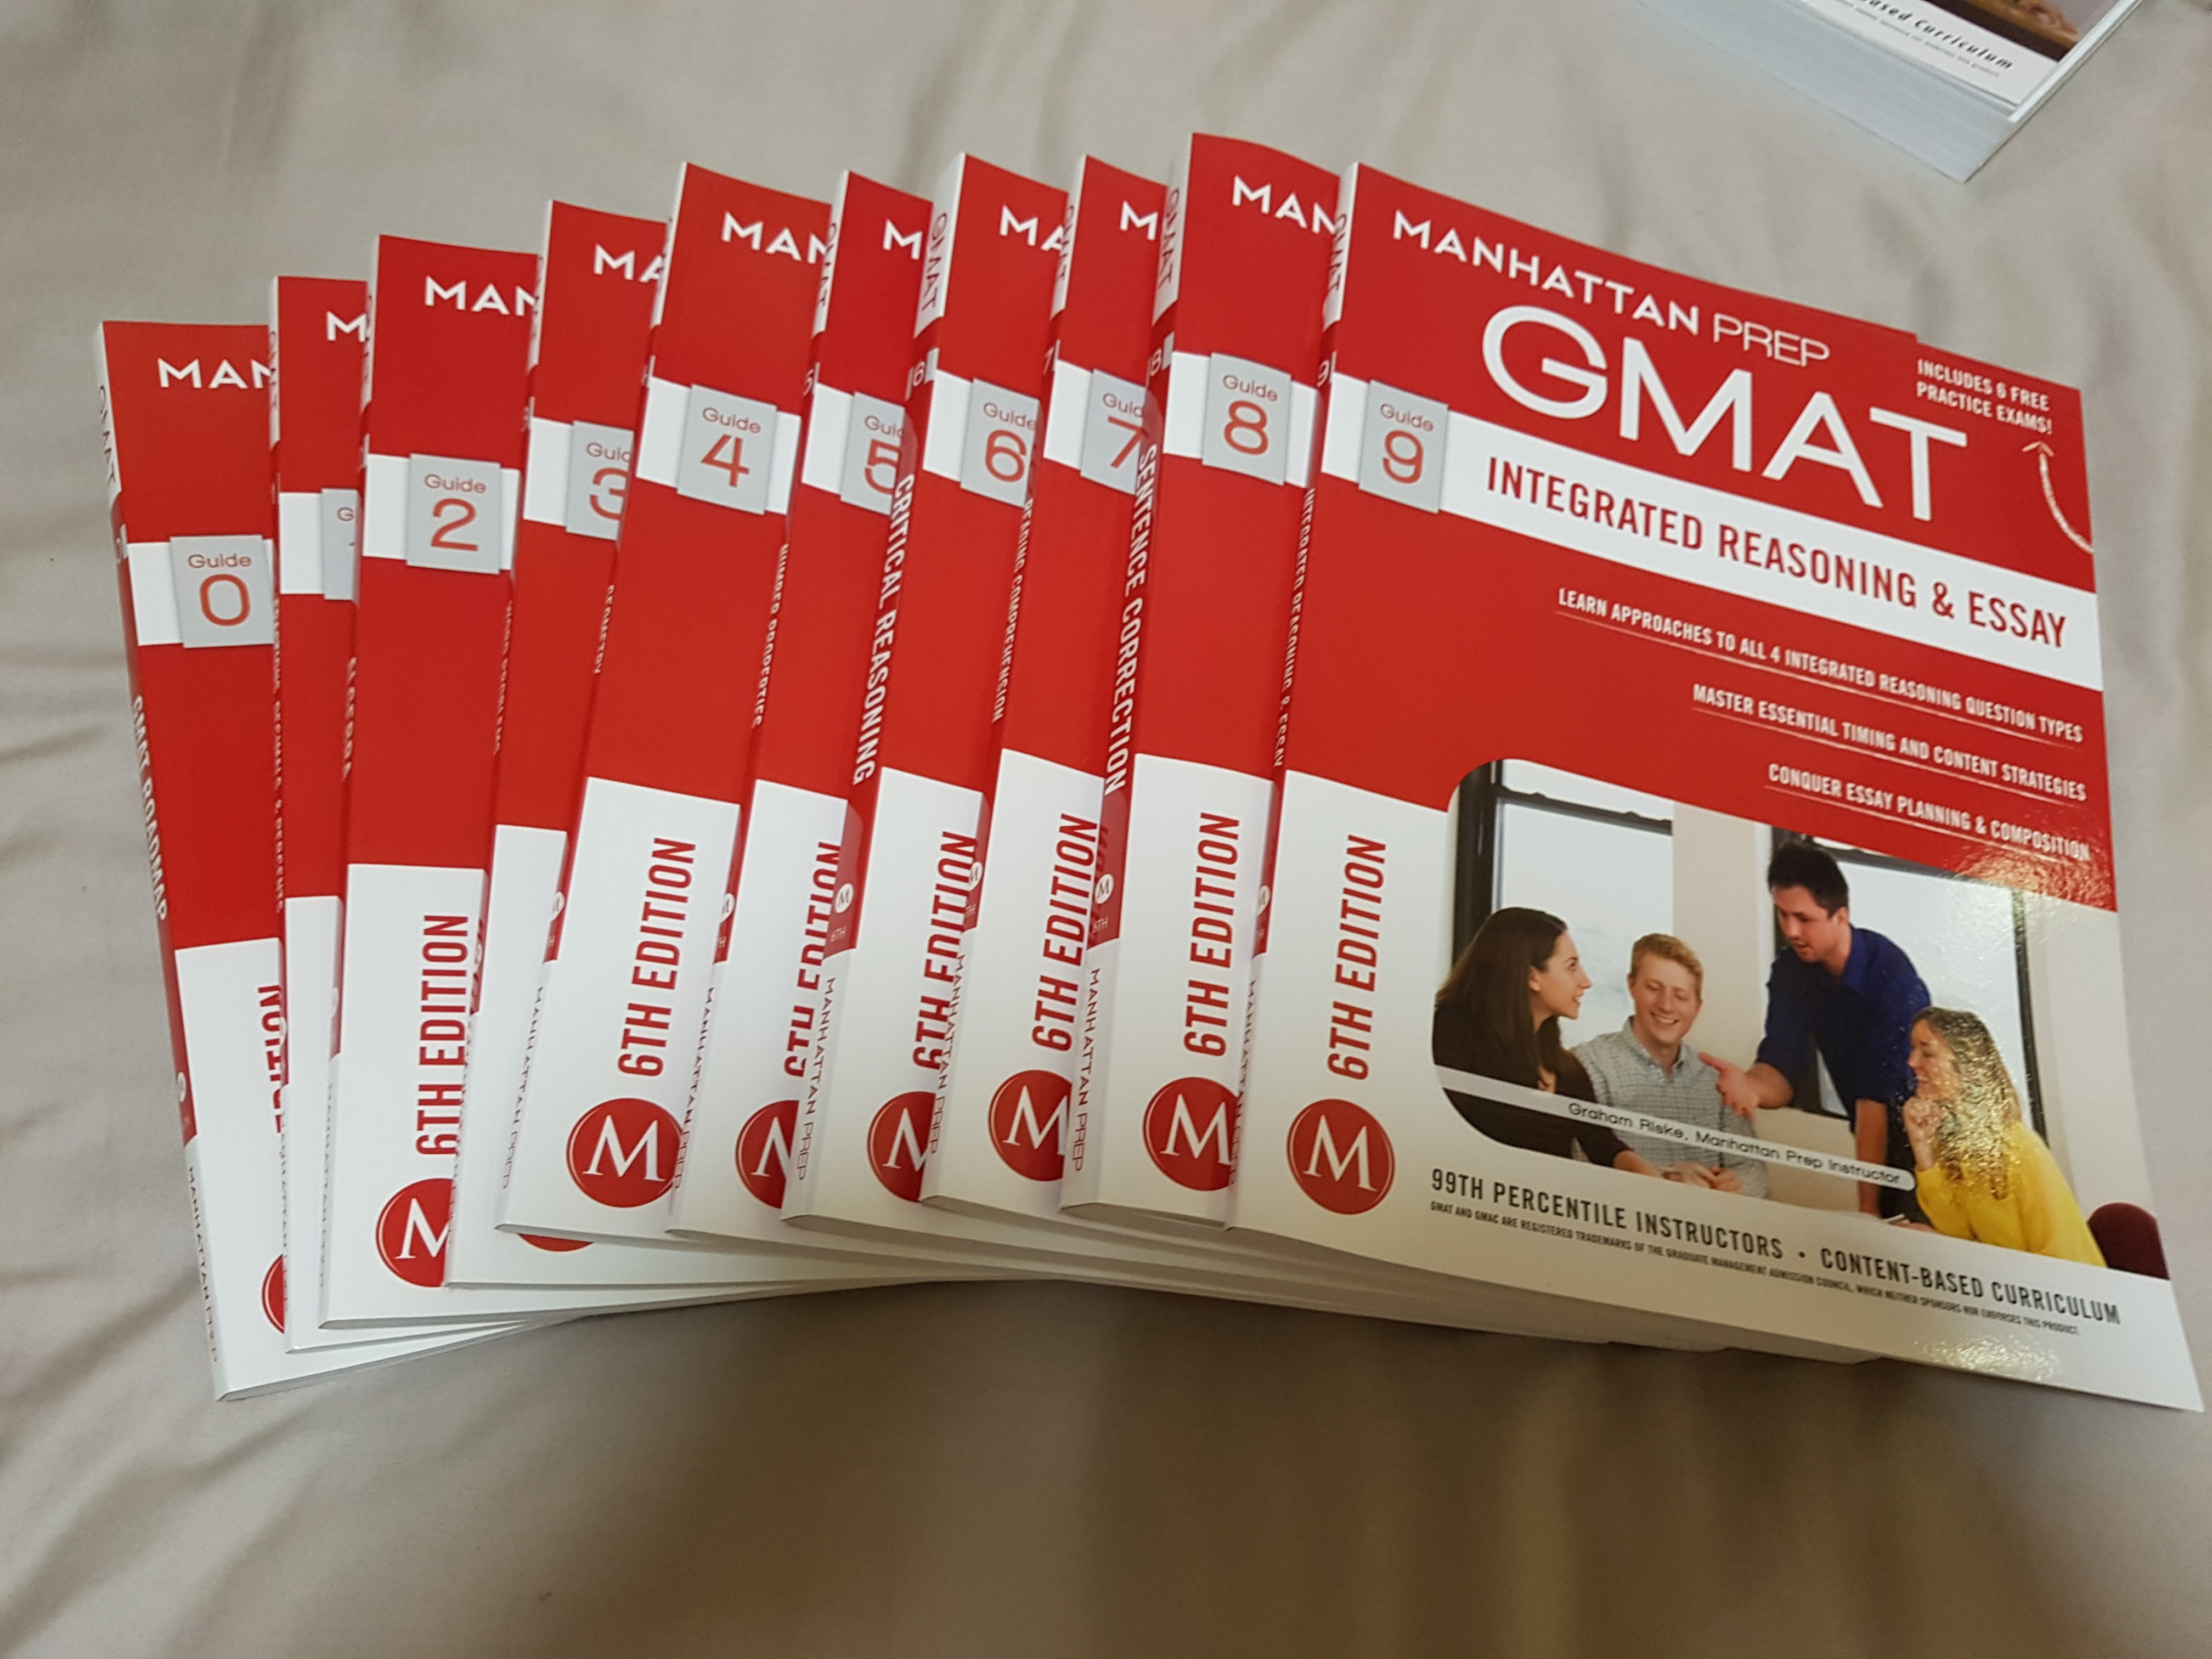 Carousell　6-9,　Hobbies　Magazines,　Books　Toys,　and　Children's　Guide　GMAT　Book　Prep)　Books　Strategy　on　(Manhattan　0,